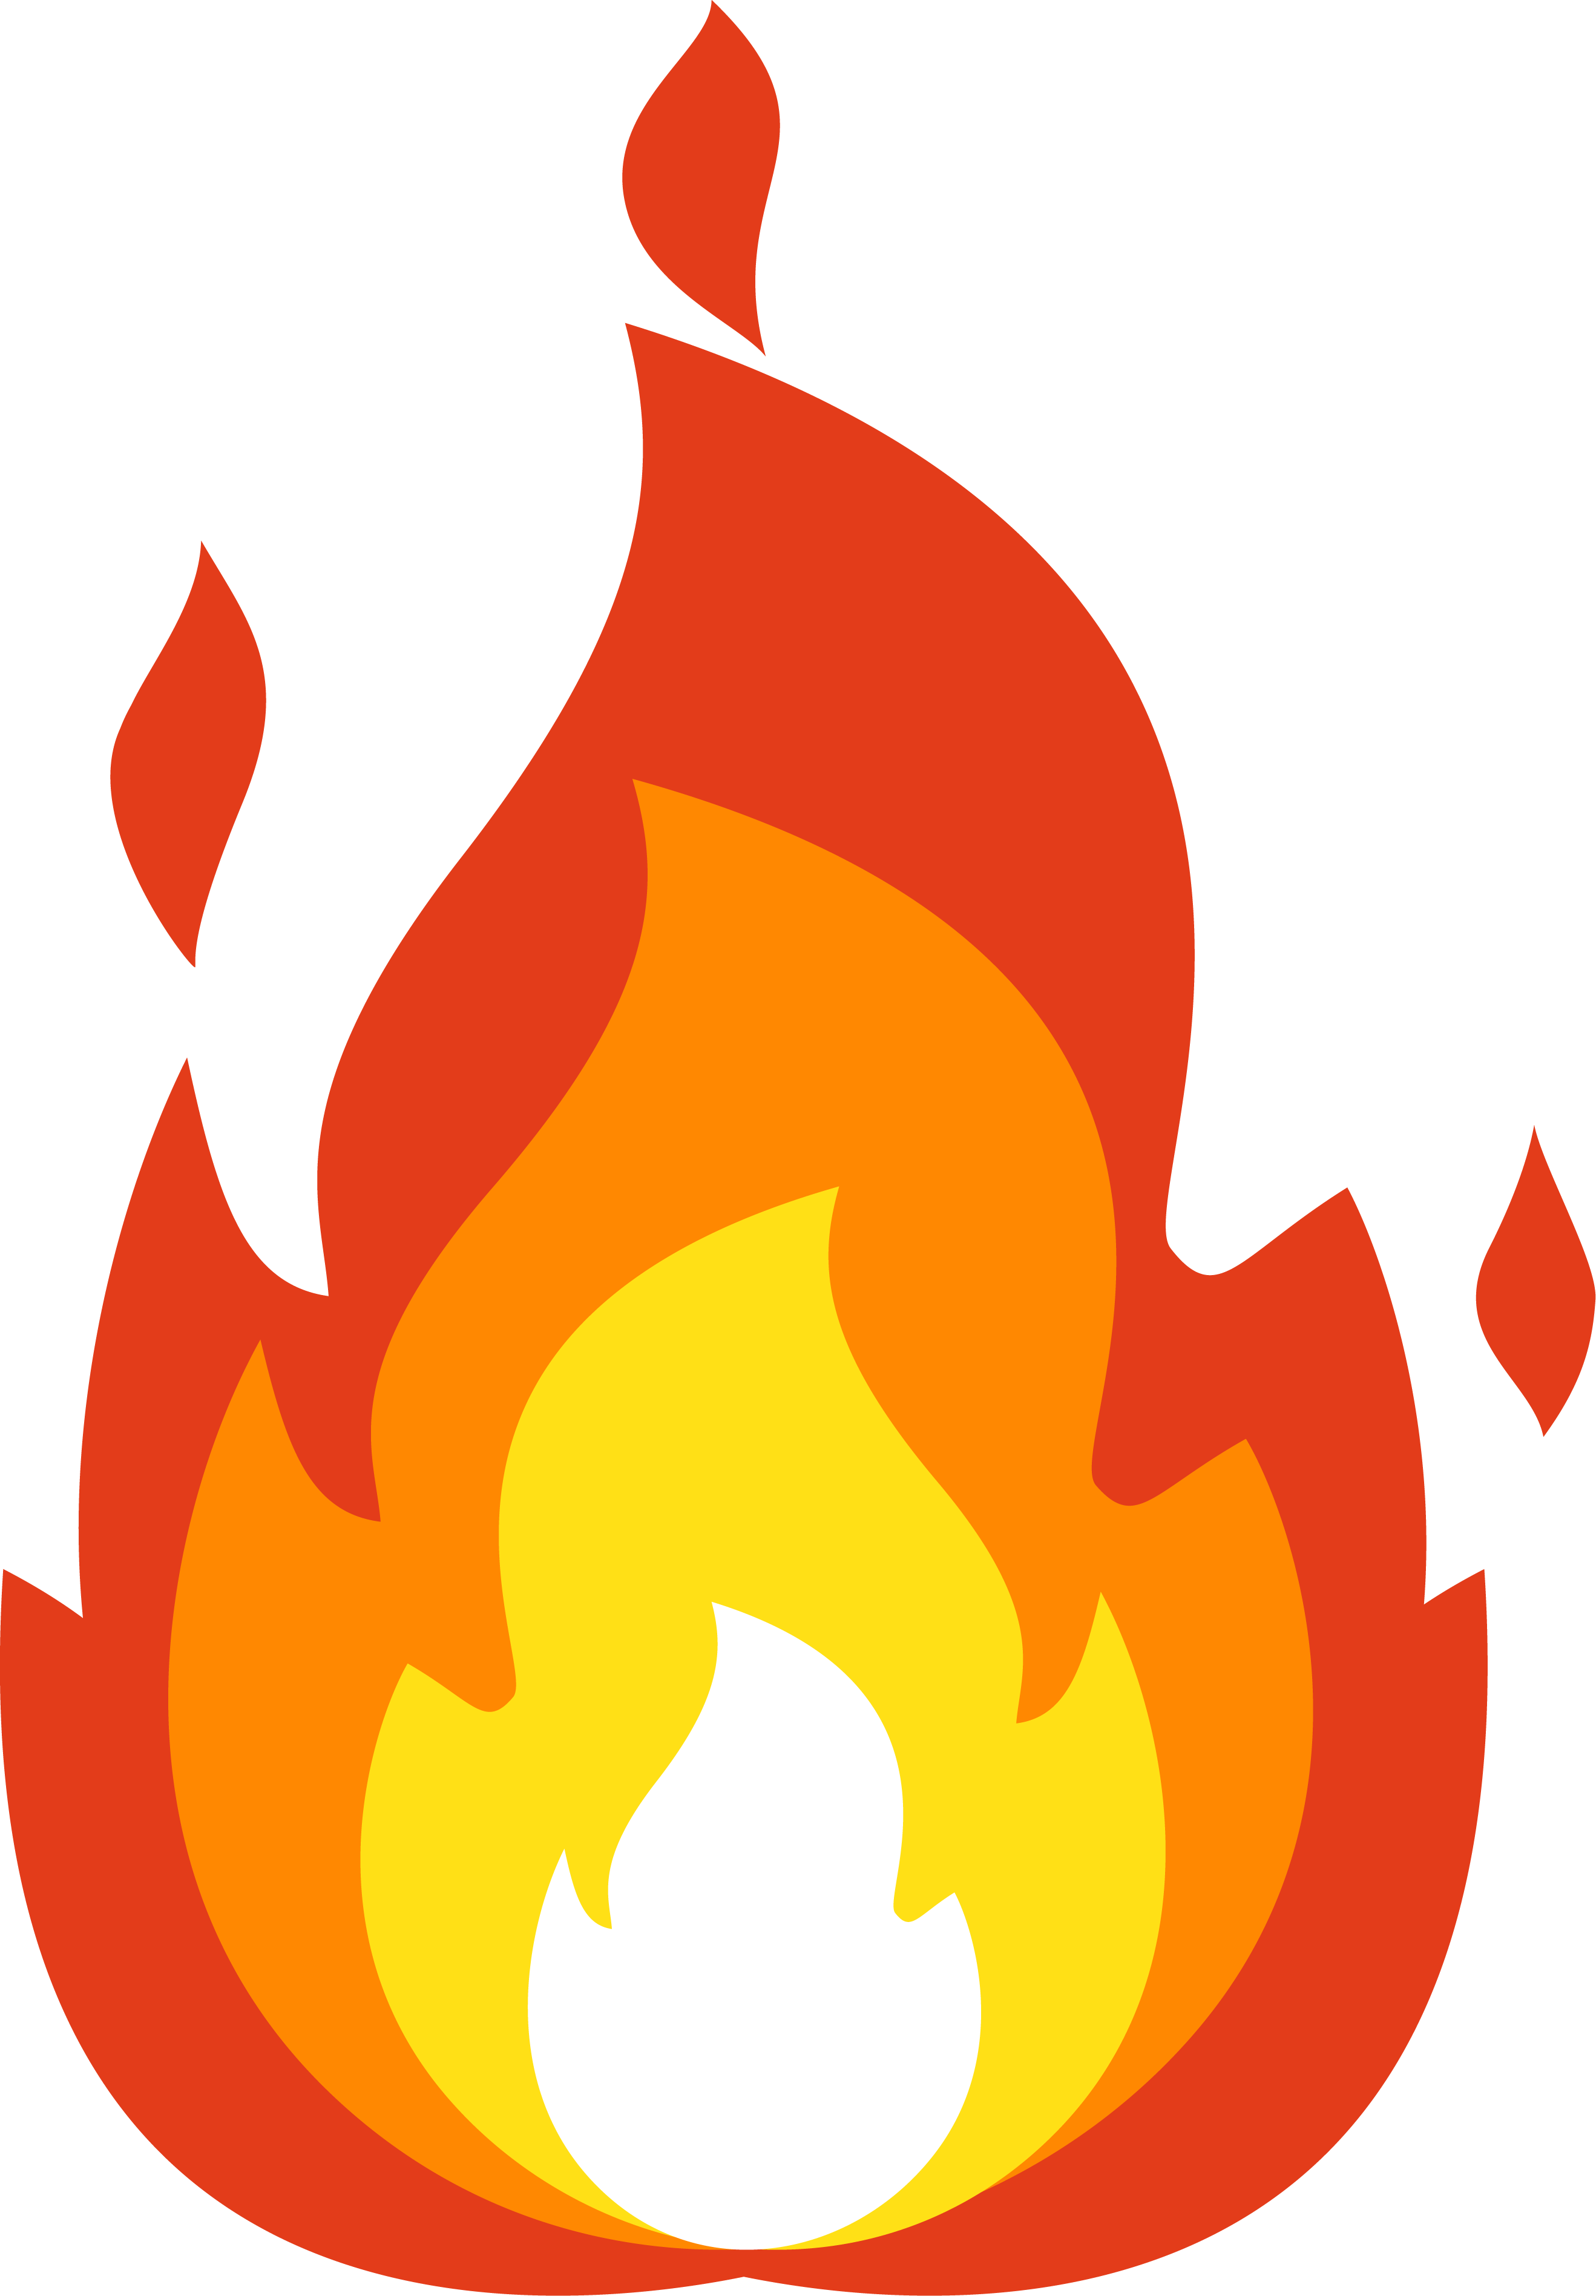 Vector illustration of fire emoji as a red, orange, and yellow flickering flame.